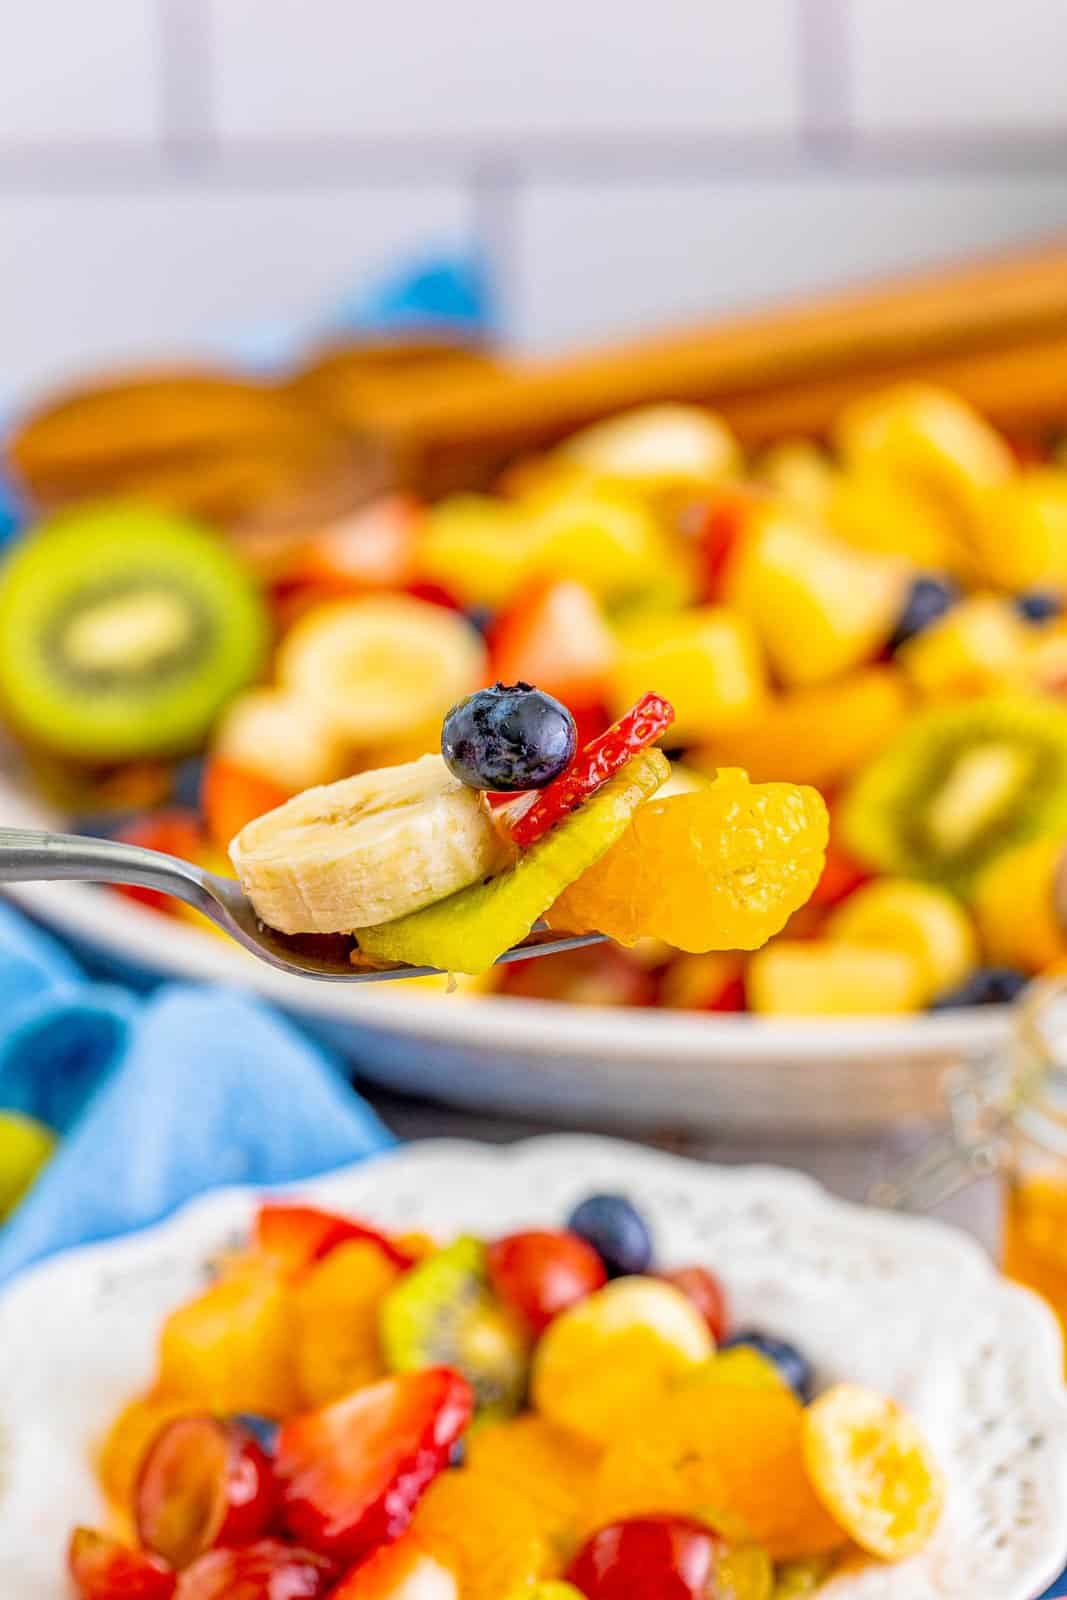 Spoon holding up a bite of fruit salad.